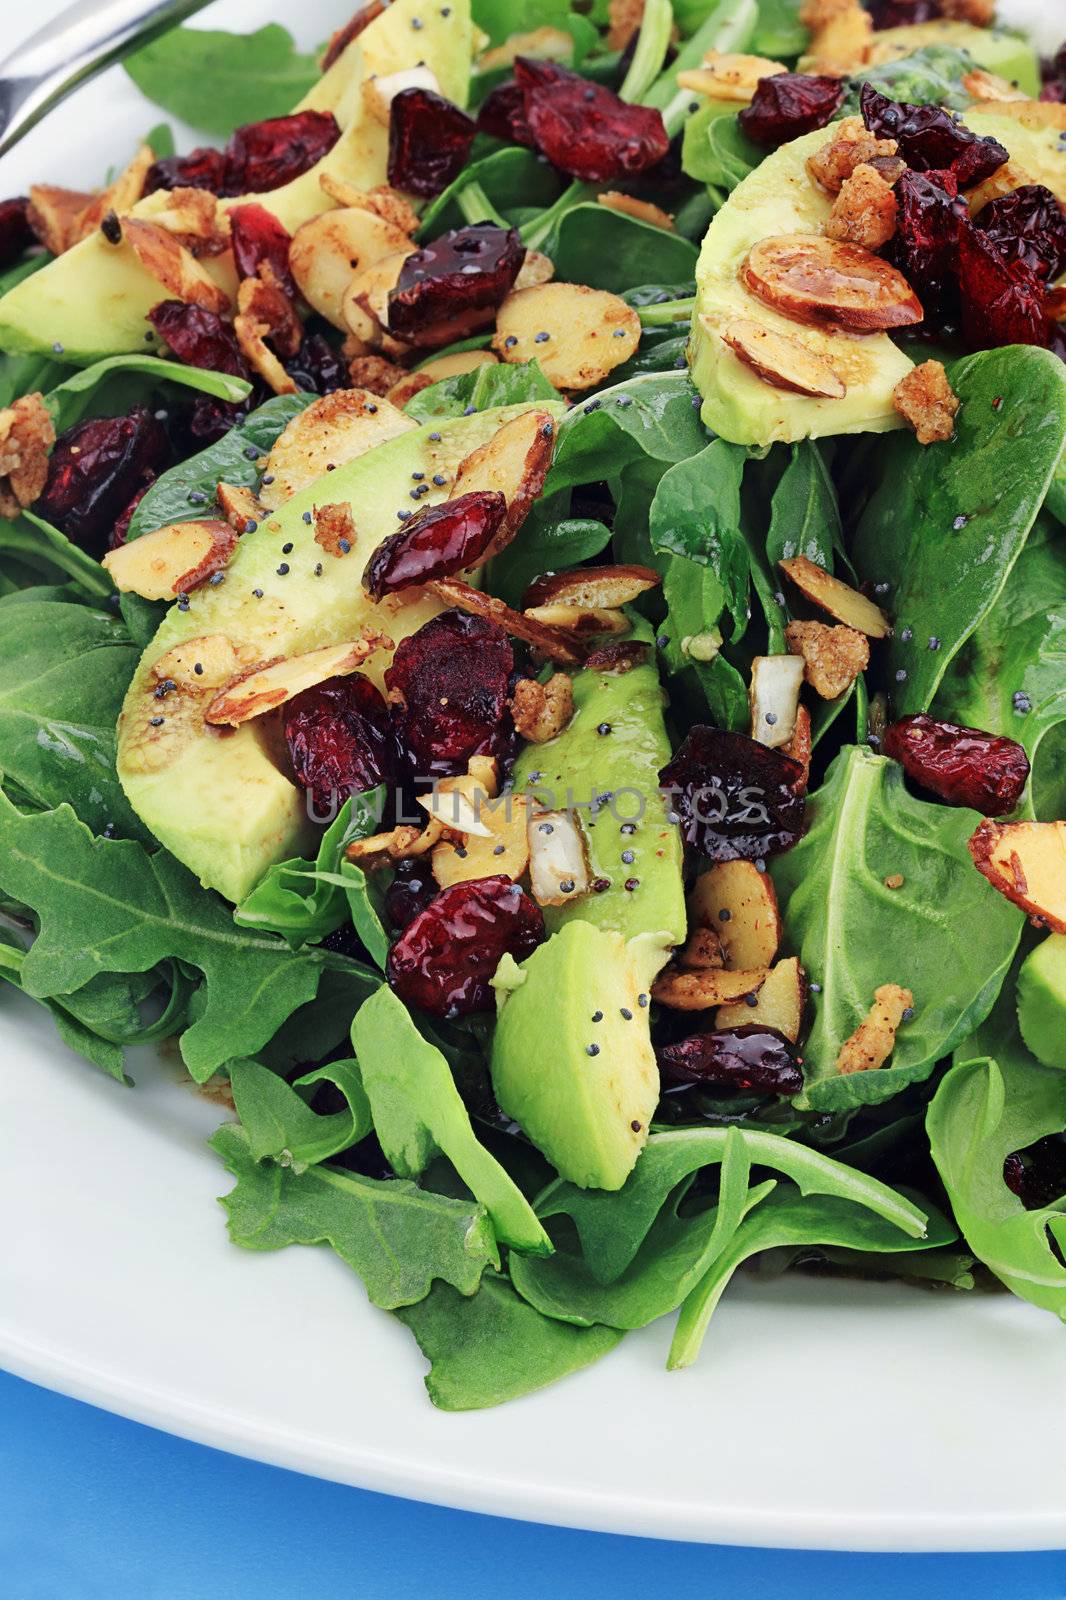 Healthy spinach and arugula salad with cilantro, dried cranberries, spiced almonds and avocados served with a lite vinaigrette.
